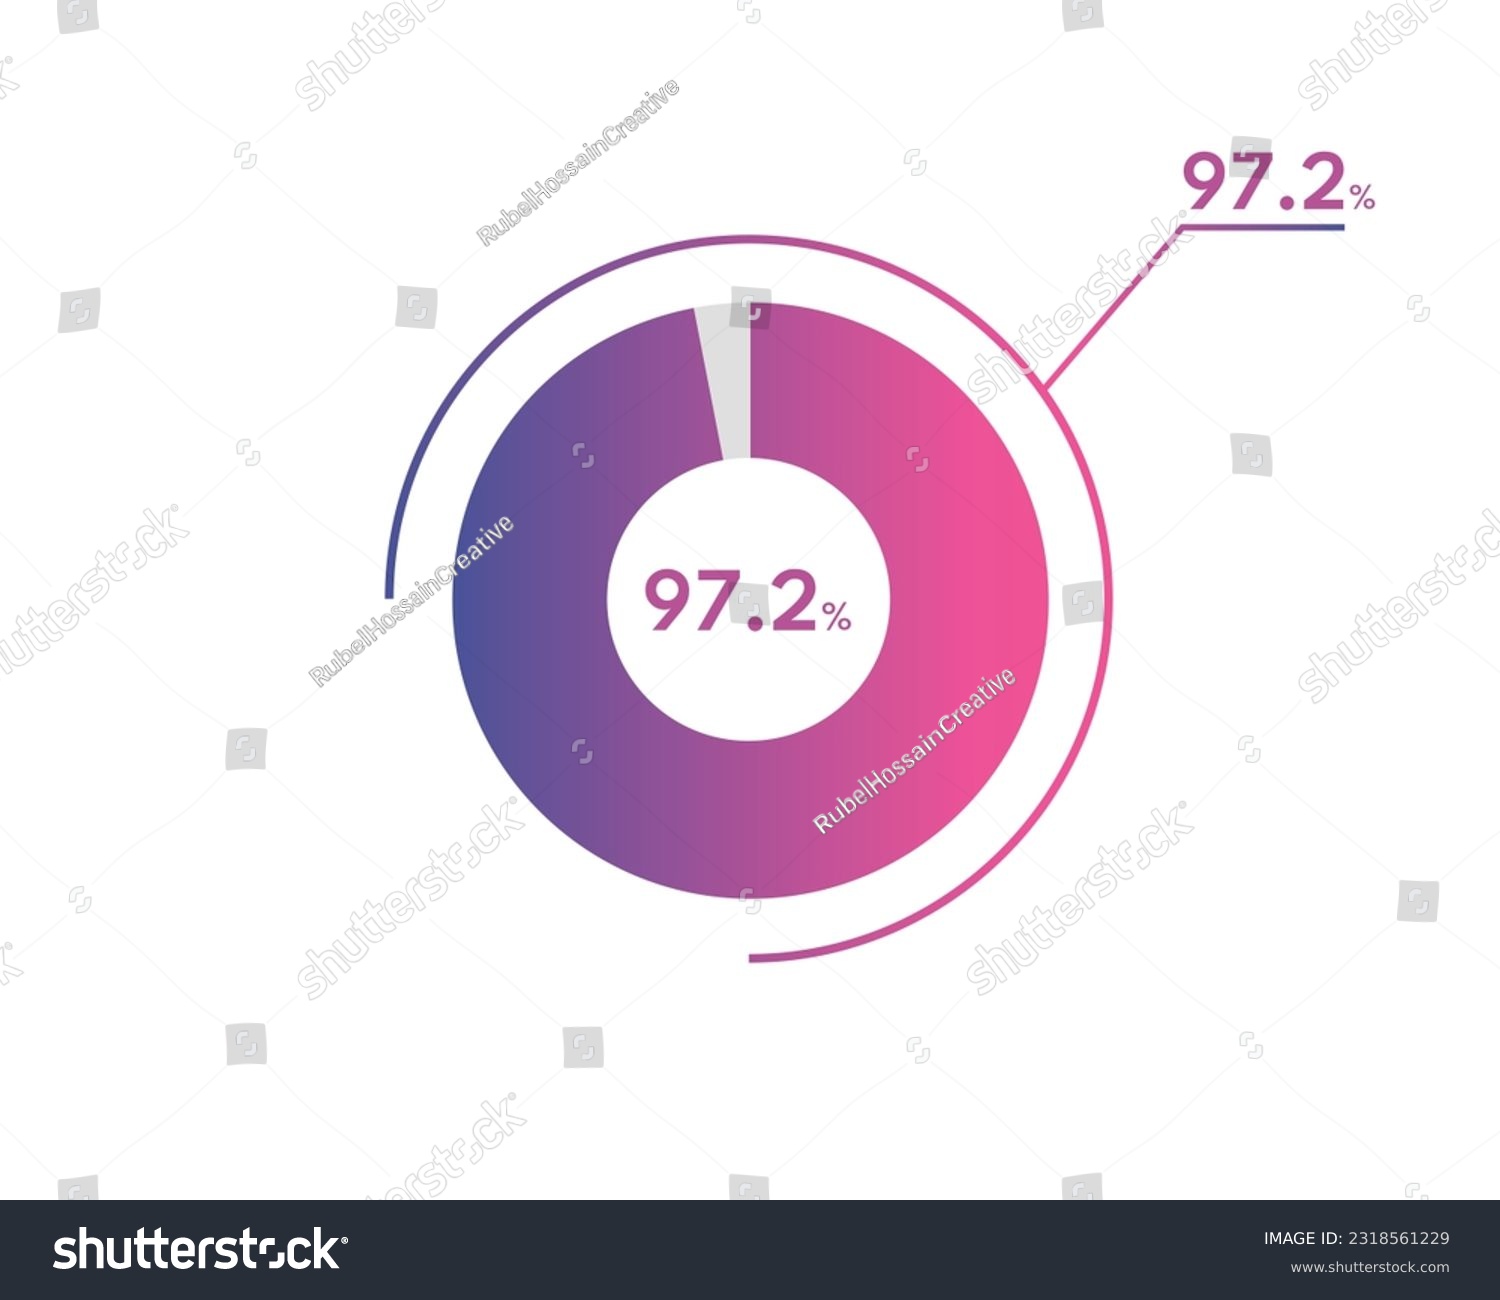 SVG of 97.2 Percentage circle diagrams Infographics vector, circle diagram business illustration, Designing the 97.2% Segment in the Pie Chart. svg